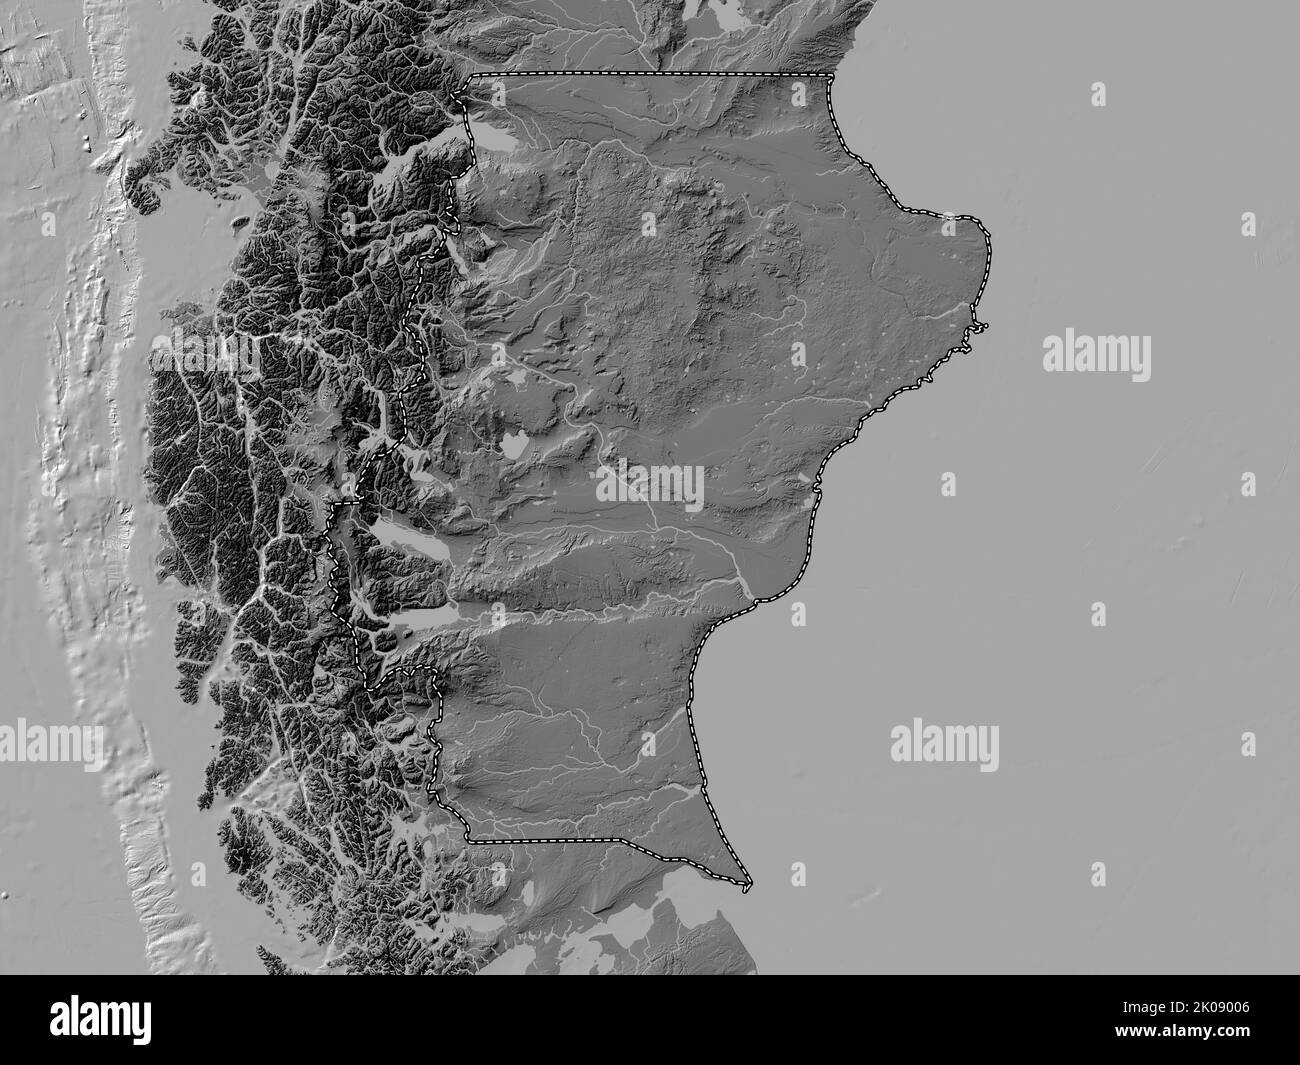 Santa Cruz, province of Argentina. Bilevel elevation map with lakes and rivers Stock Photo